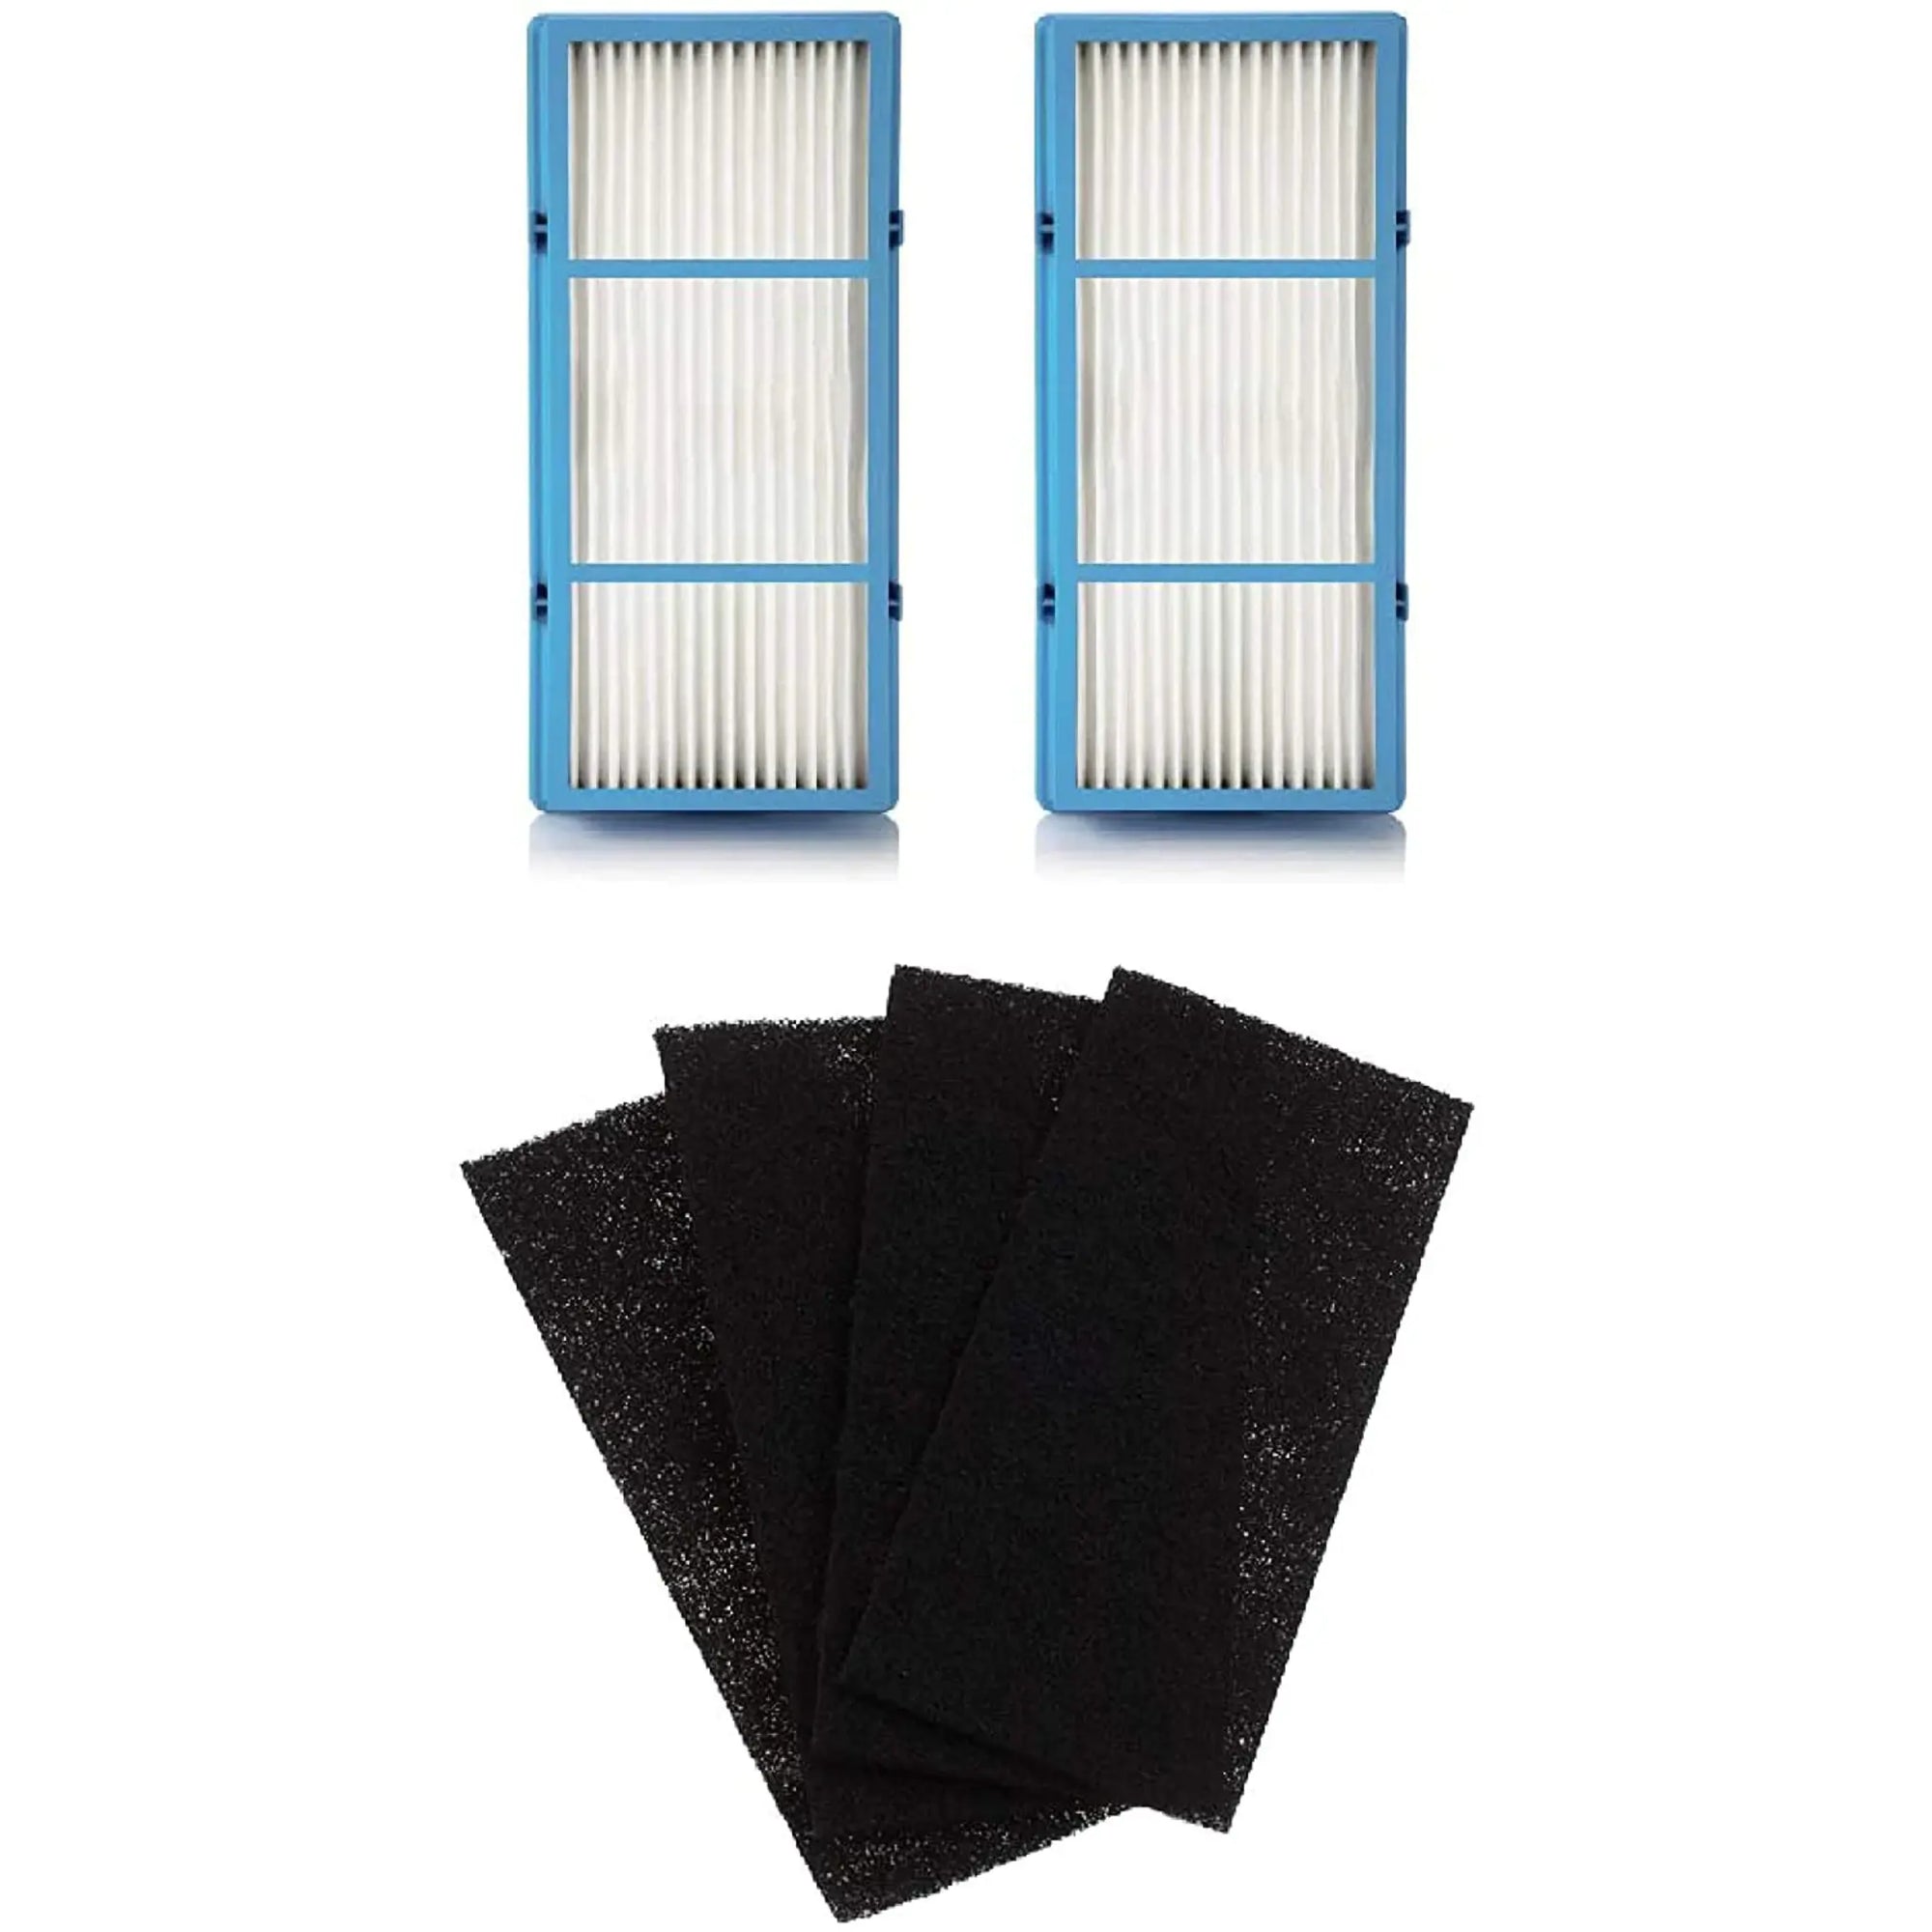 Nispira 3-in-1 True HEPA Carbon Filter Replacement Compatible with Puroair  240 Air Purifier, 3 Pack 